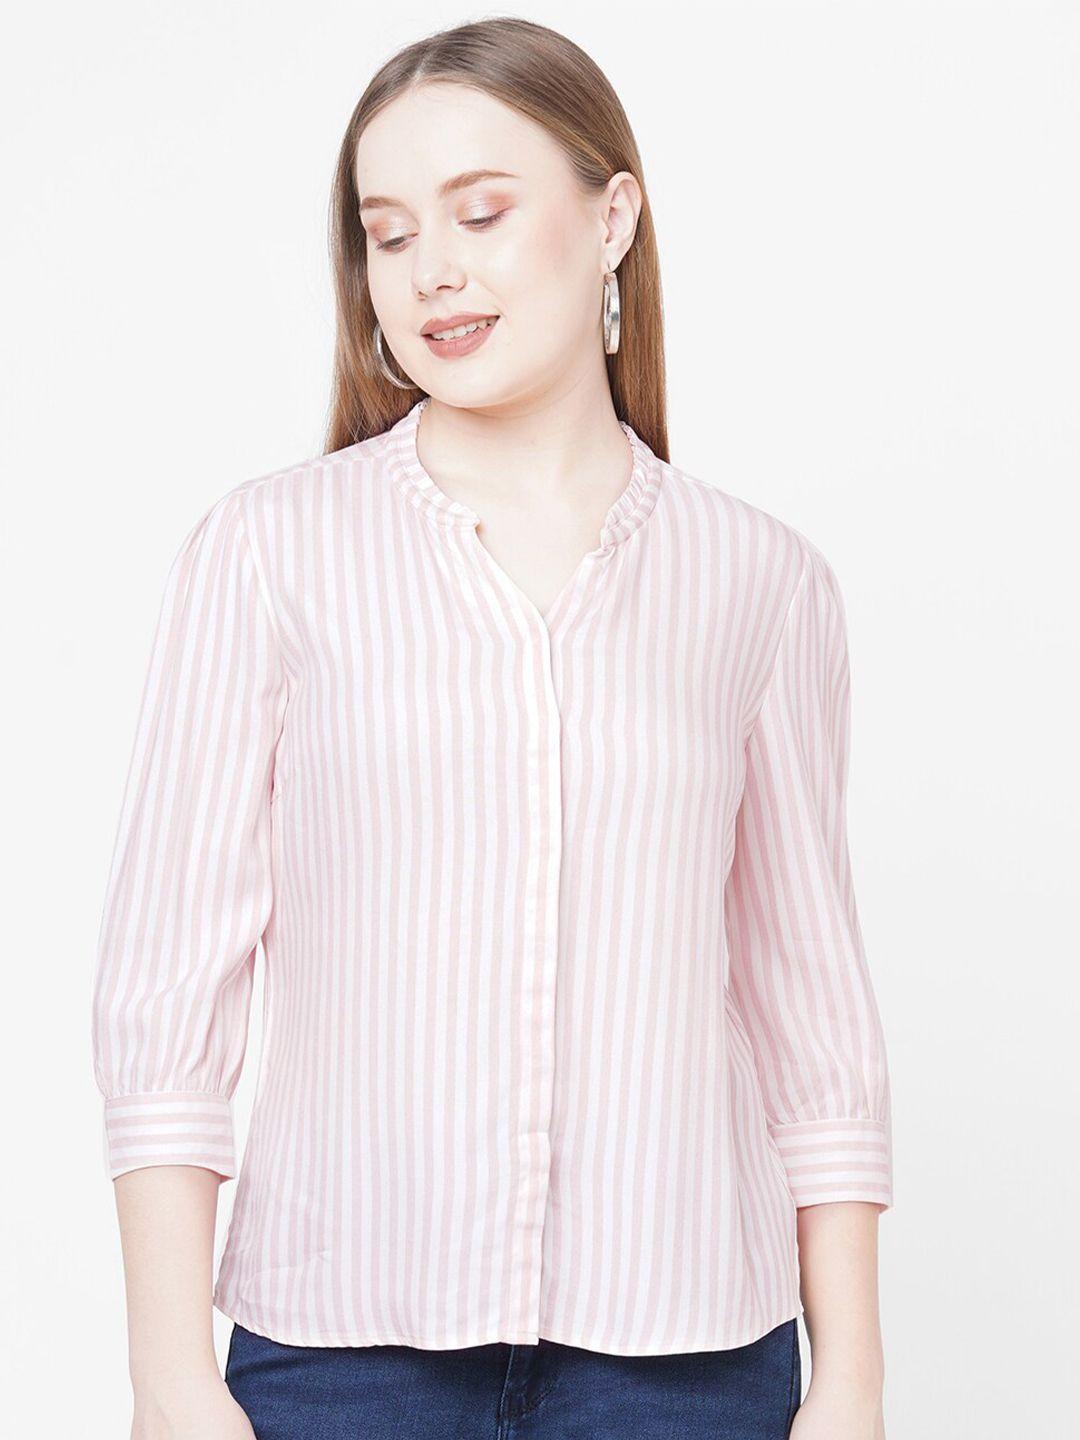 kraus jeans women peach-colored slim fit striped casual shirt